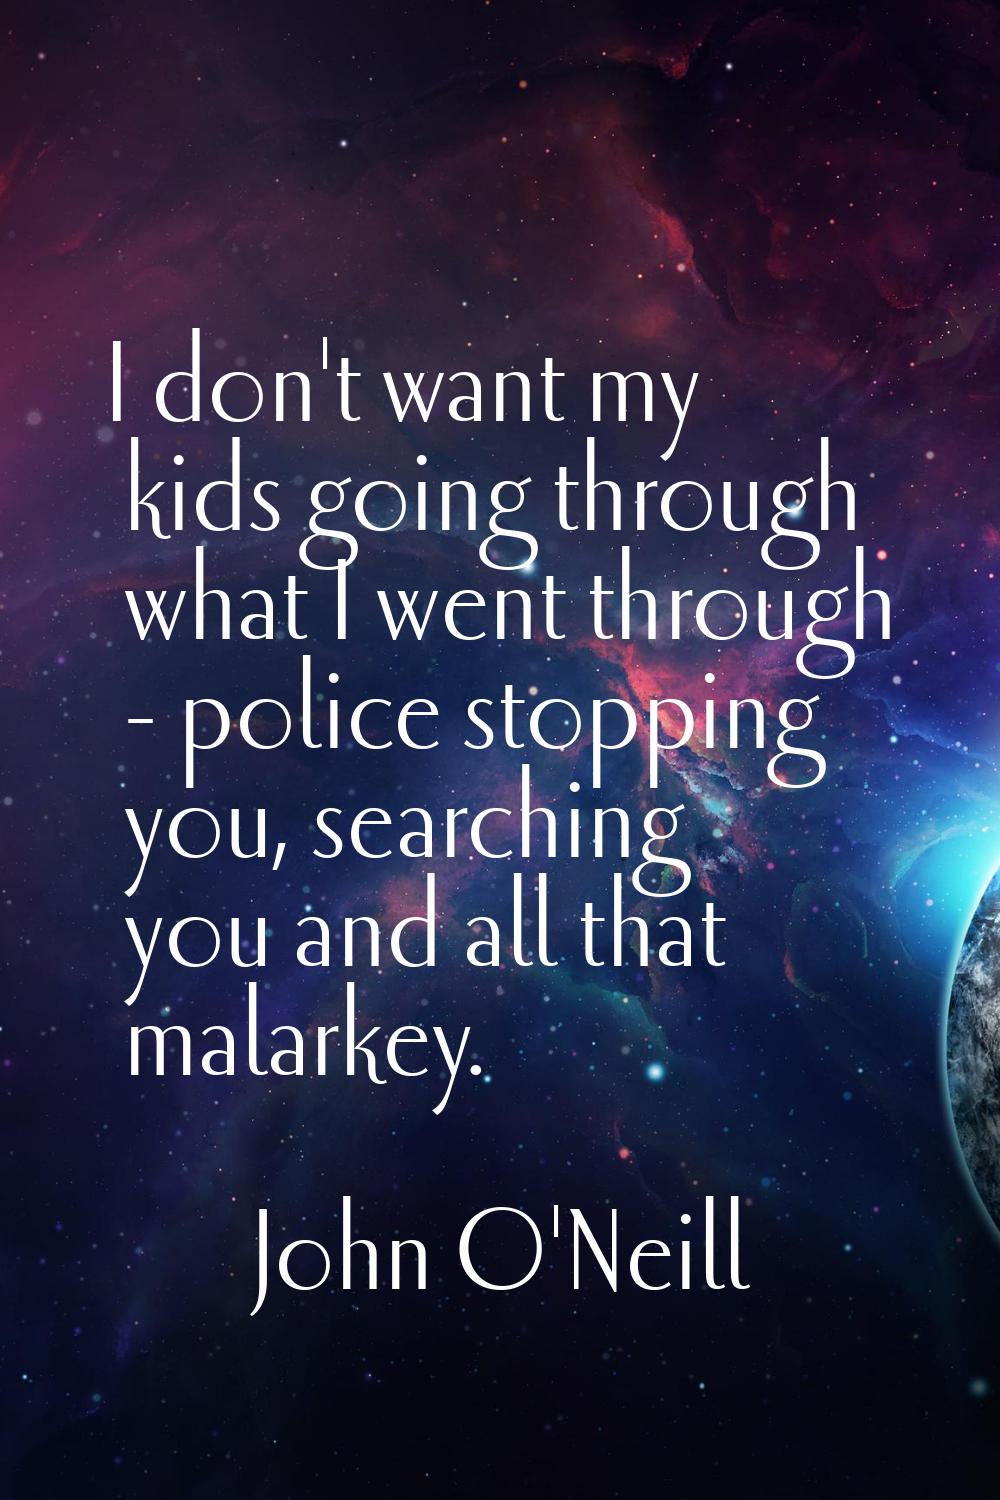 I don't want my kids going through what I went through - police stopping you, searching you and all